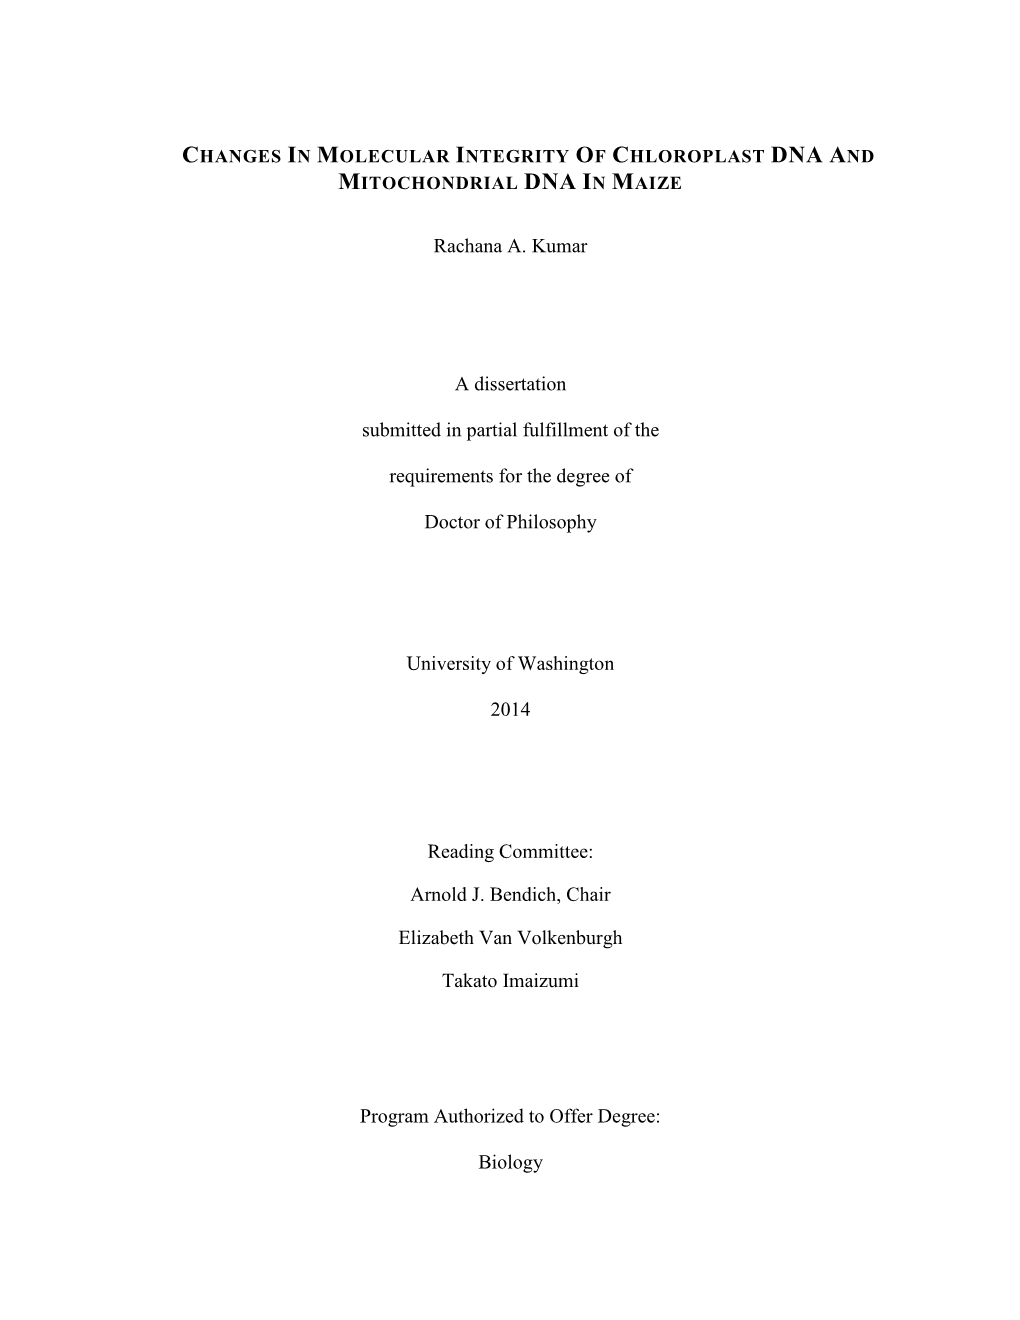 Rachana A. Kumar a Dissertation Submitted in Partial Fulfillment Of